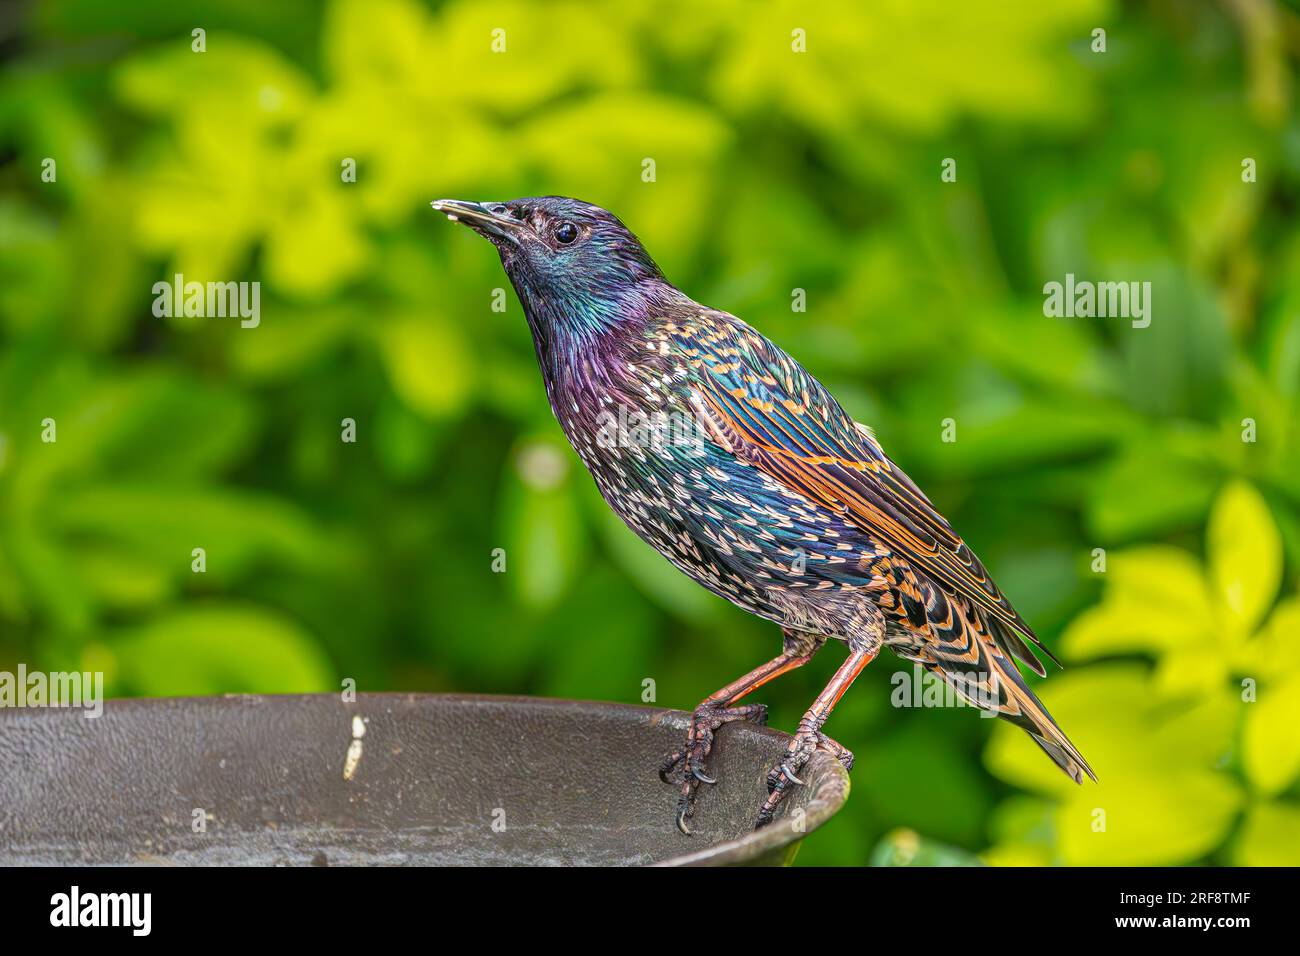 Starling having a drink from a bird bath Stock Photo